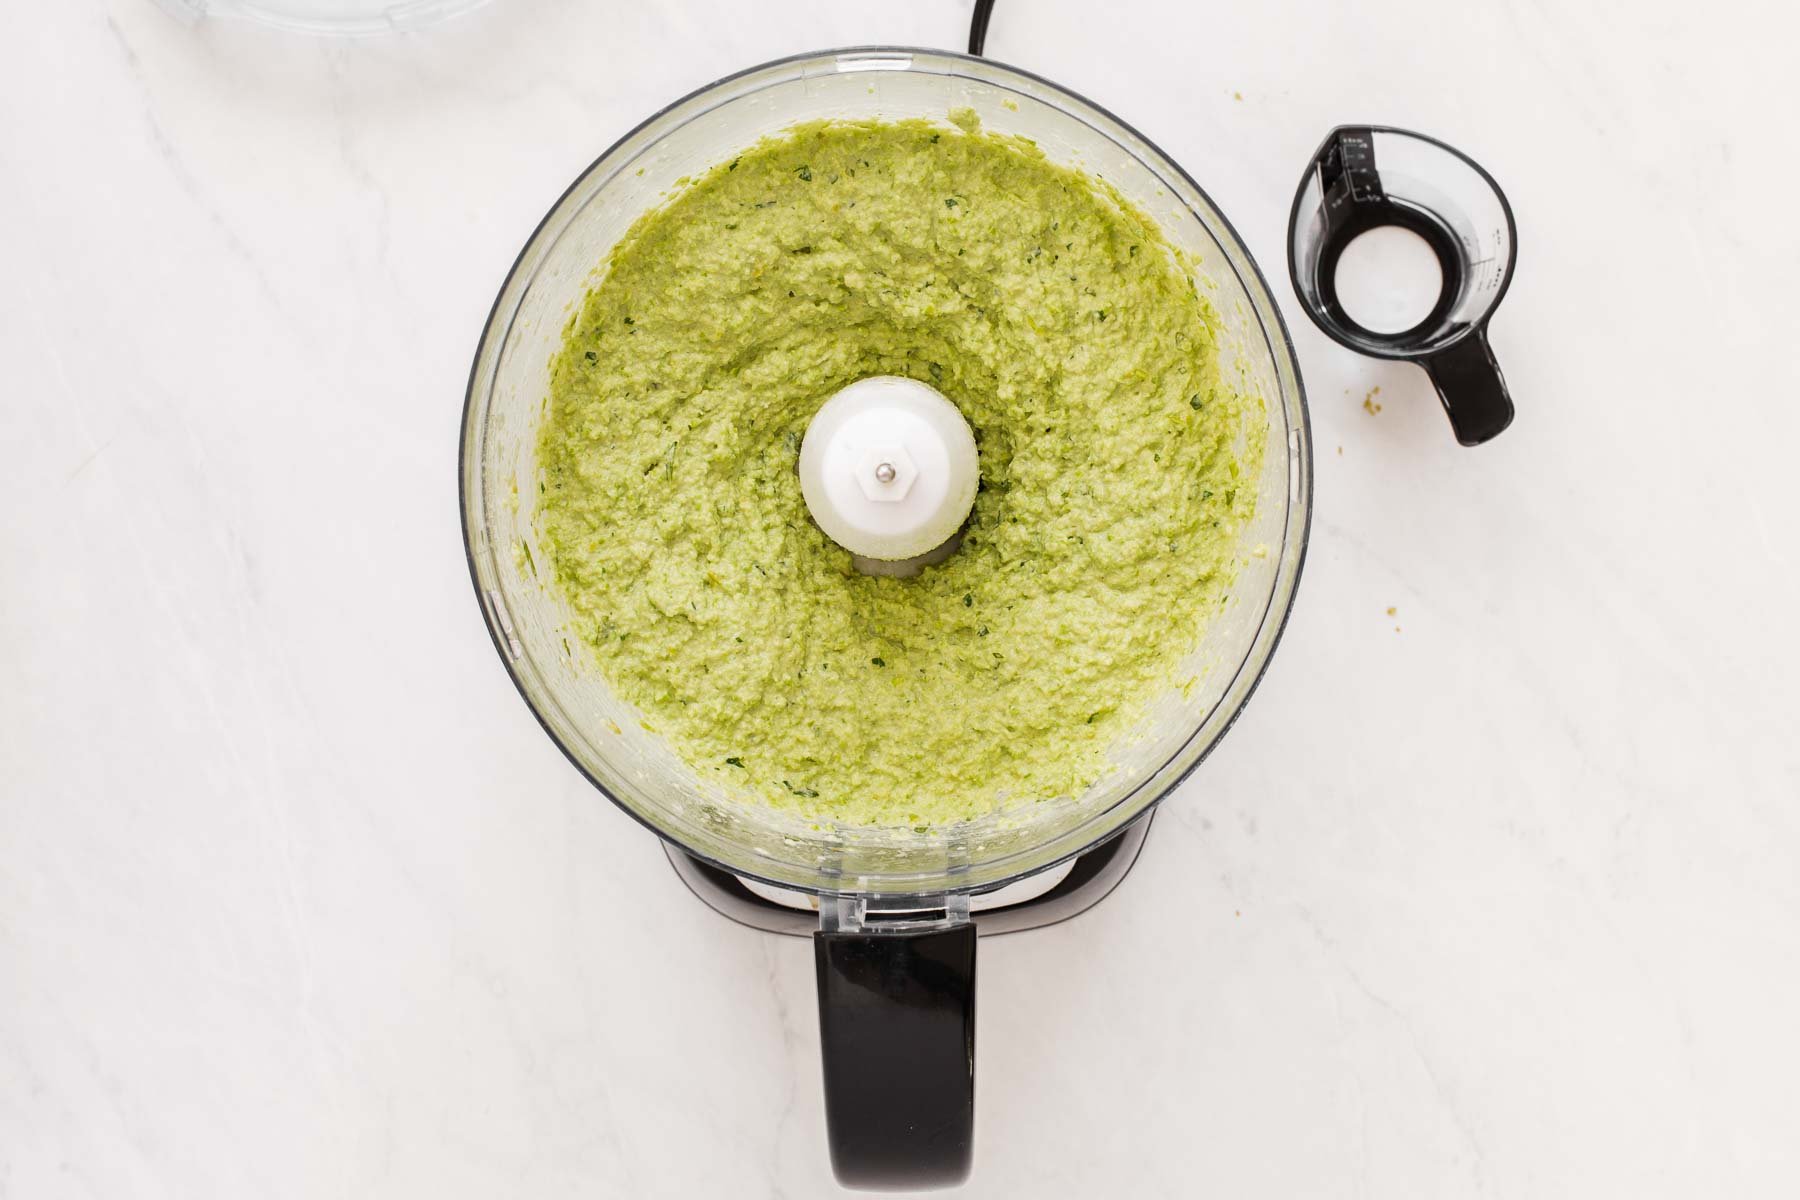 Bright green dip in mini food processor bowl on marble counter.